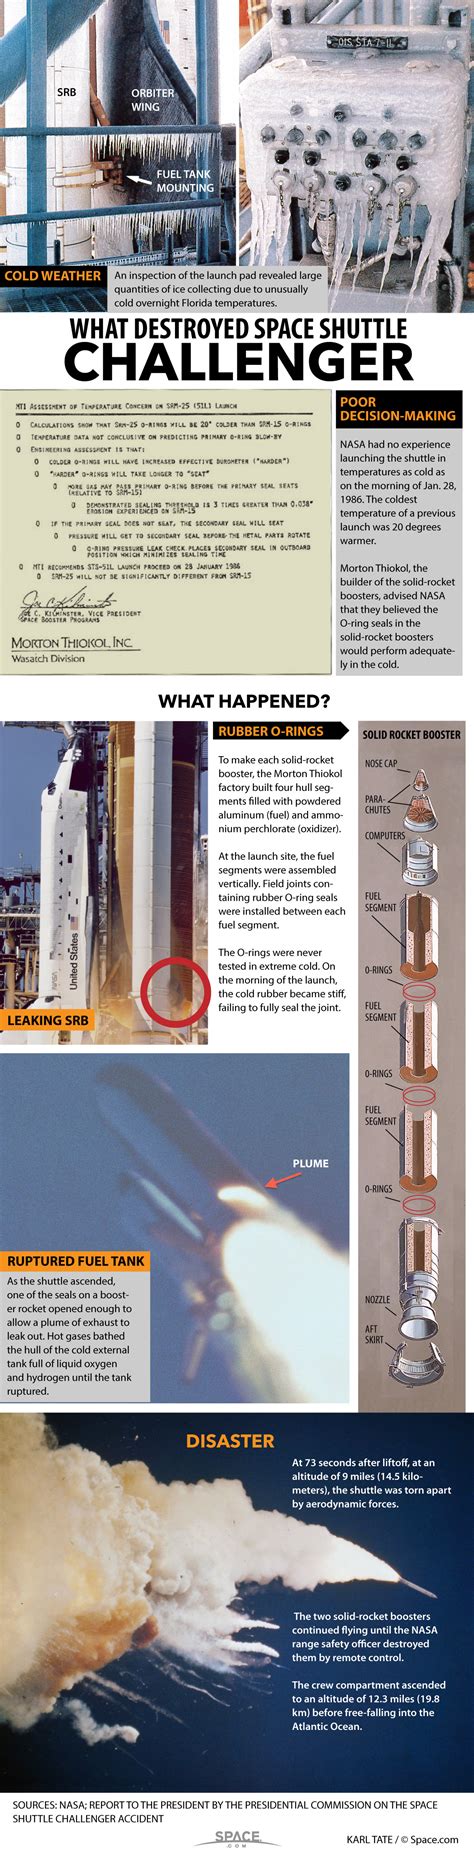 The Space Shuttle Challenger Disaster: What Happened? (Infographic) | Space